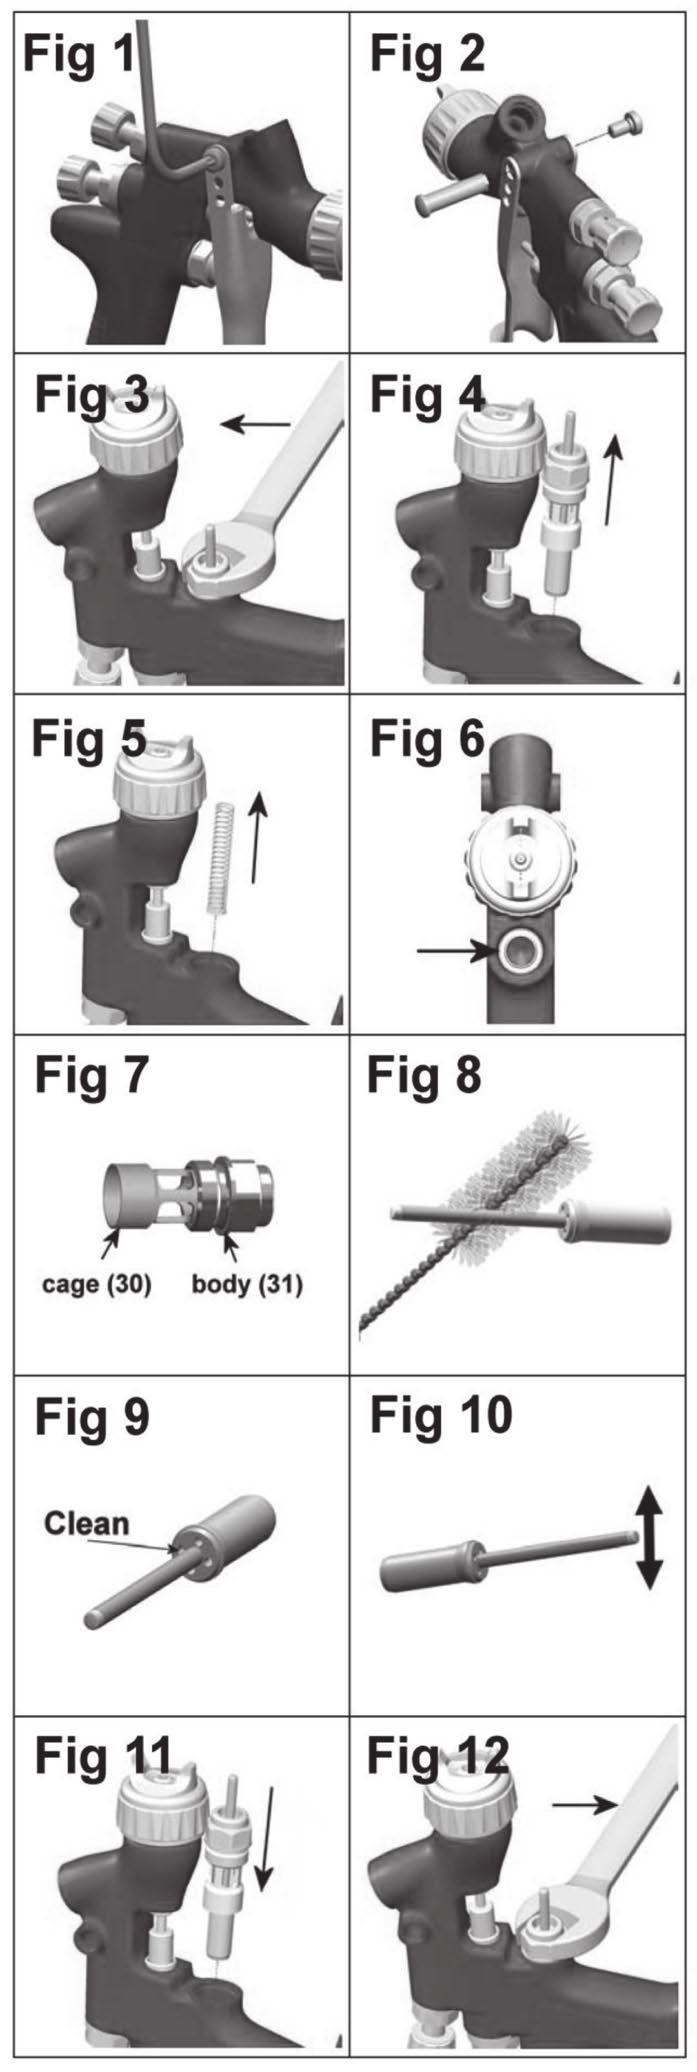 Page 9 Parts Replacement/Maintenance AIR VALVE INSTRUCTIONS Servicing Air Valve Reasons to service air valve: A) Air valve not functioning correctly (may need cleaning). B) Routine maintenance.